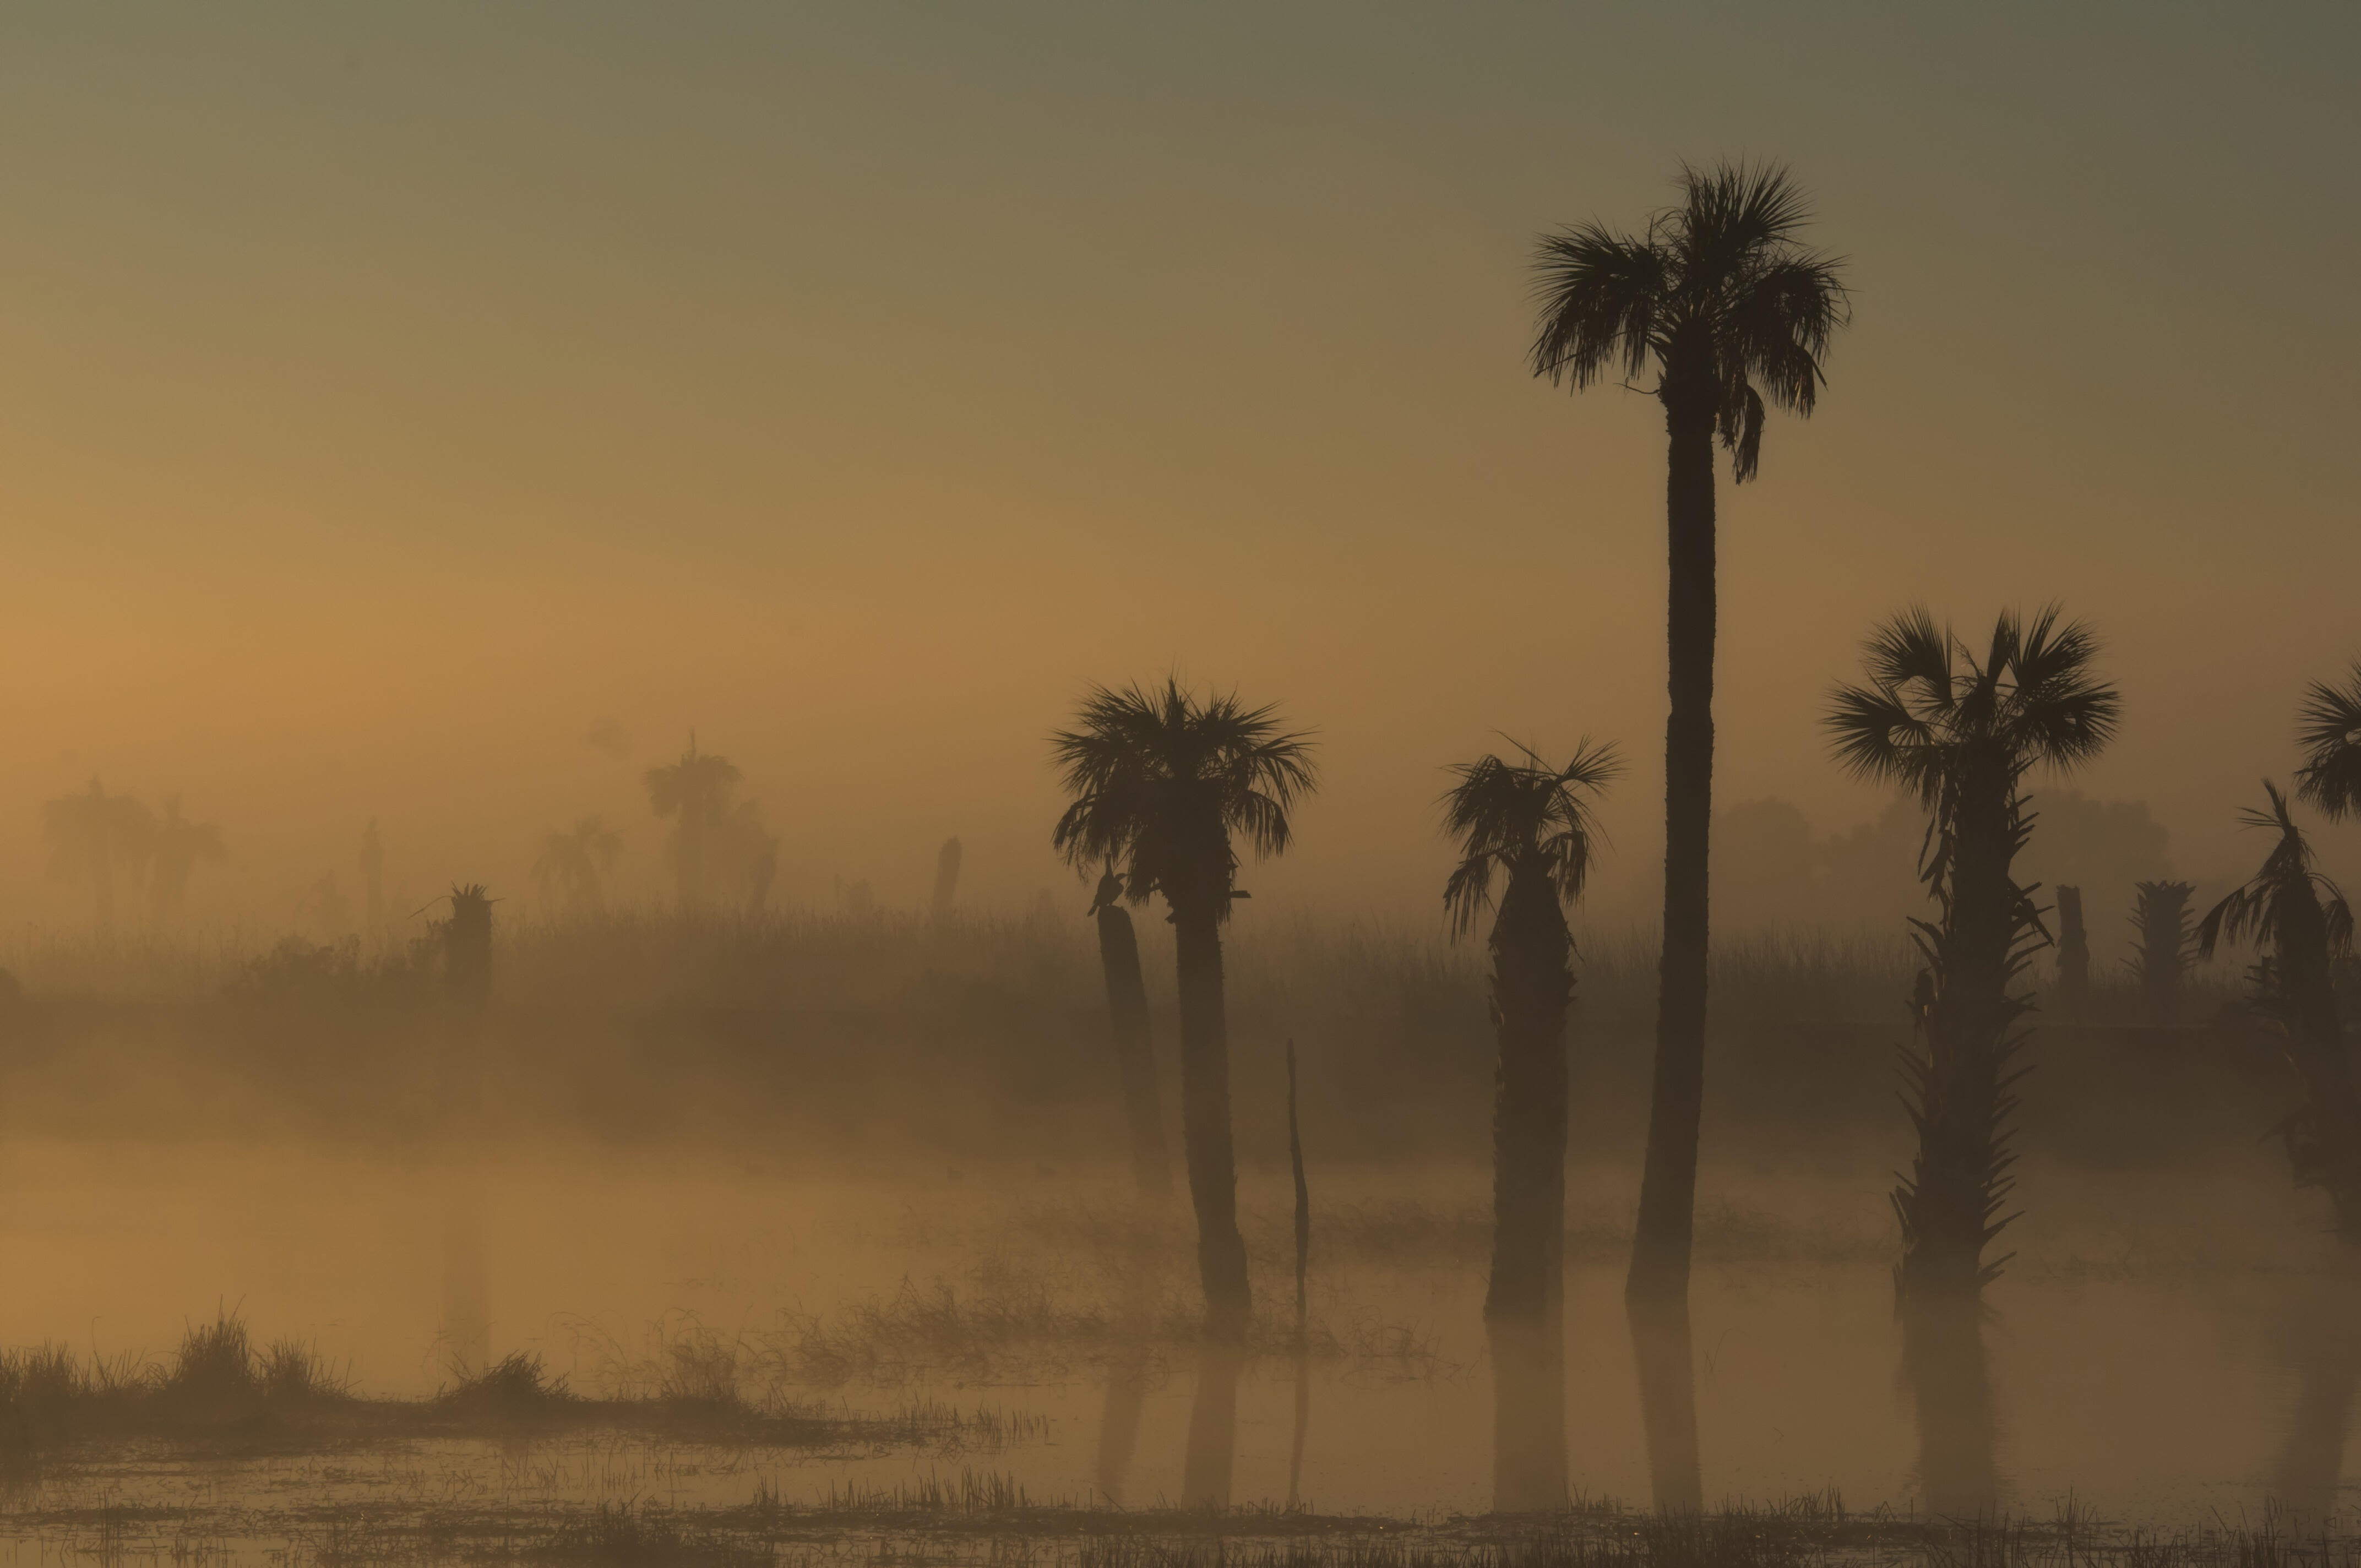 Plume Of Dust From The Sahara Desert To Bring 'Dirty Rain' To Florida | iHeart